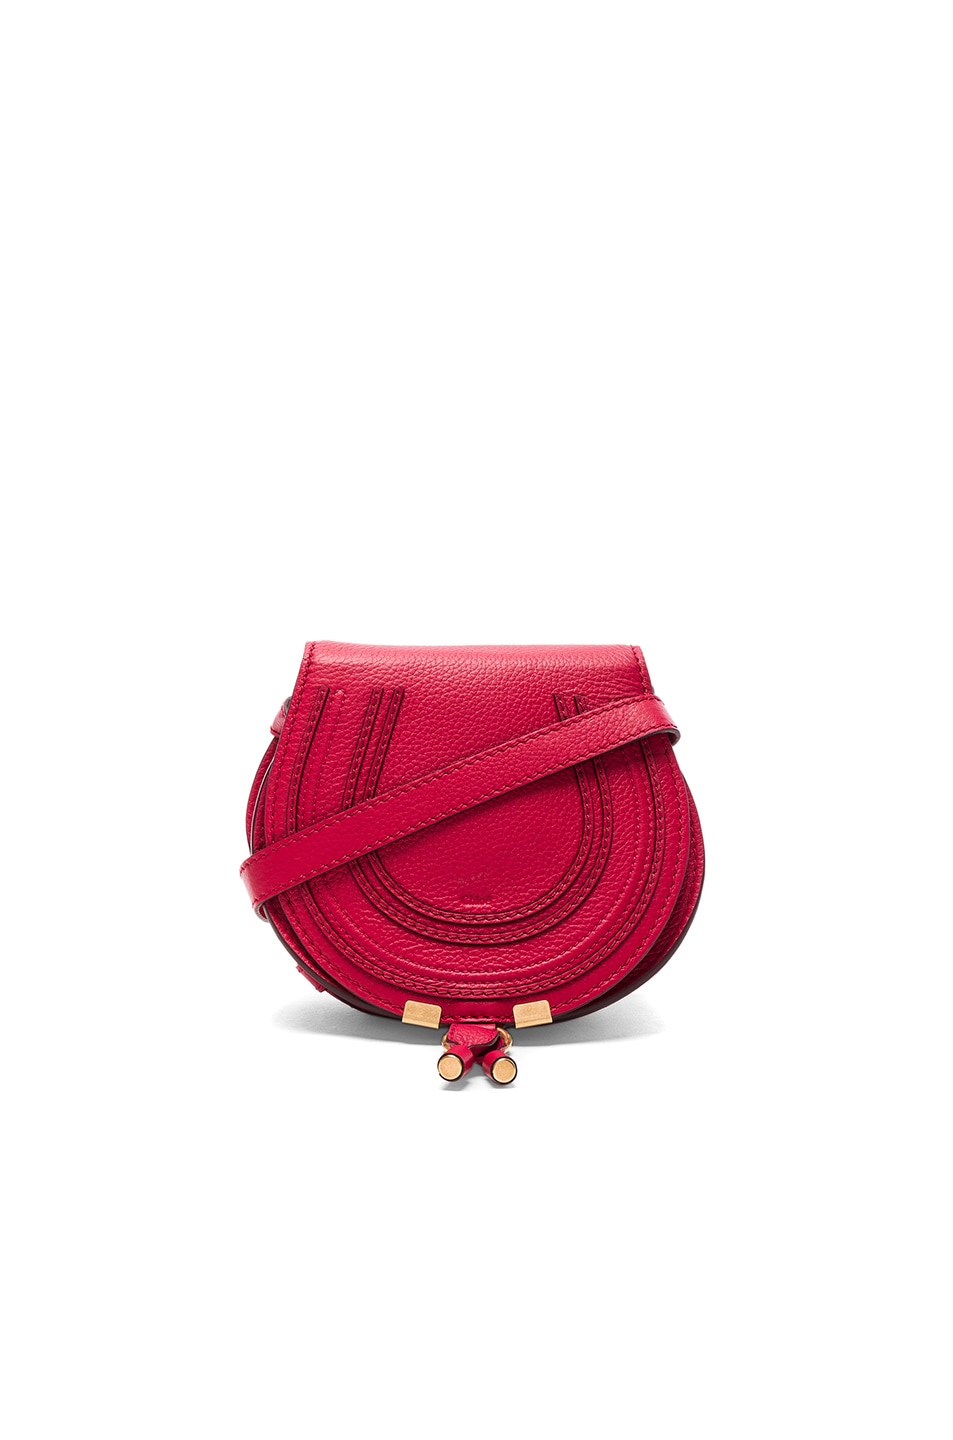 Image 1 of Chloe Small Marcie Satchel In Tulip Red in Tulip Red